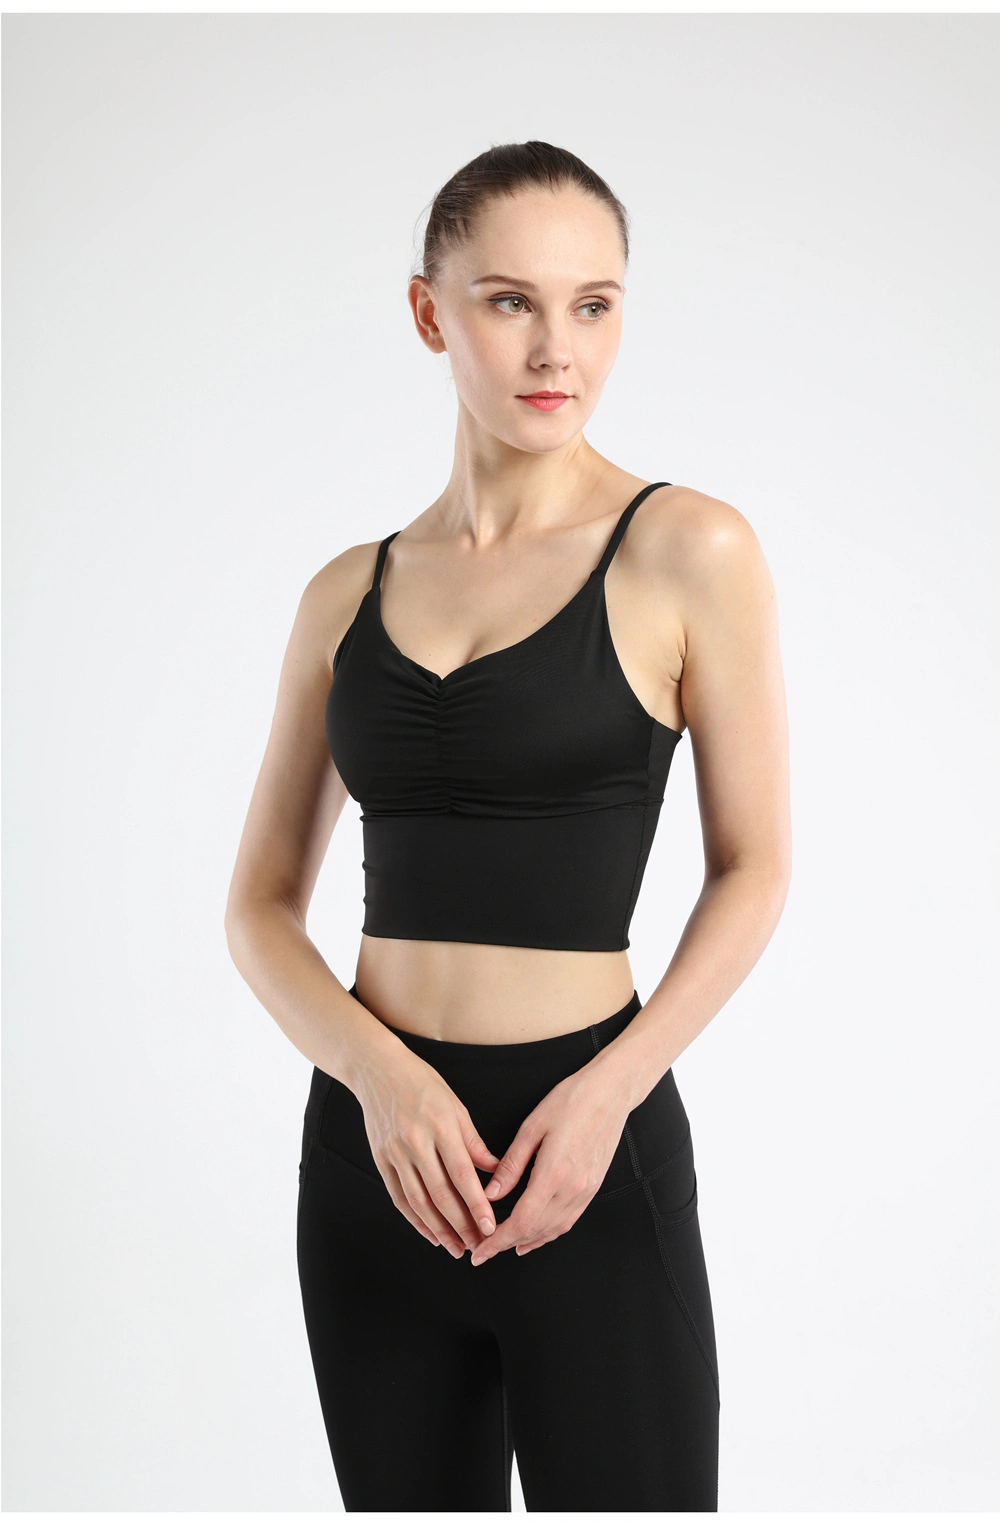 Wholesale Customized Guangzhou Best Selling Fitness & Yoga Wear Gym Clothes Bra